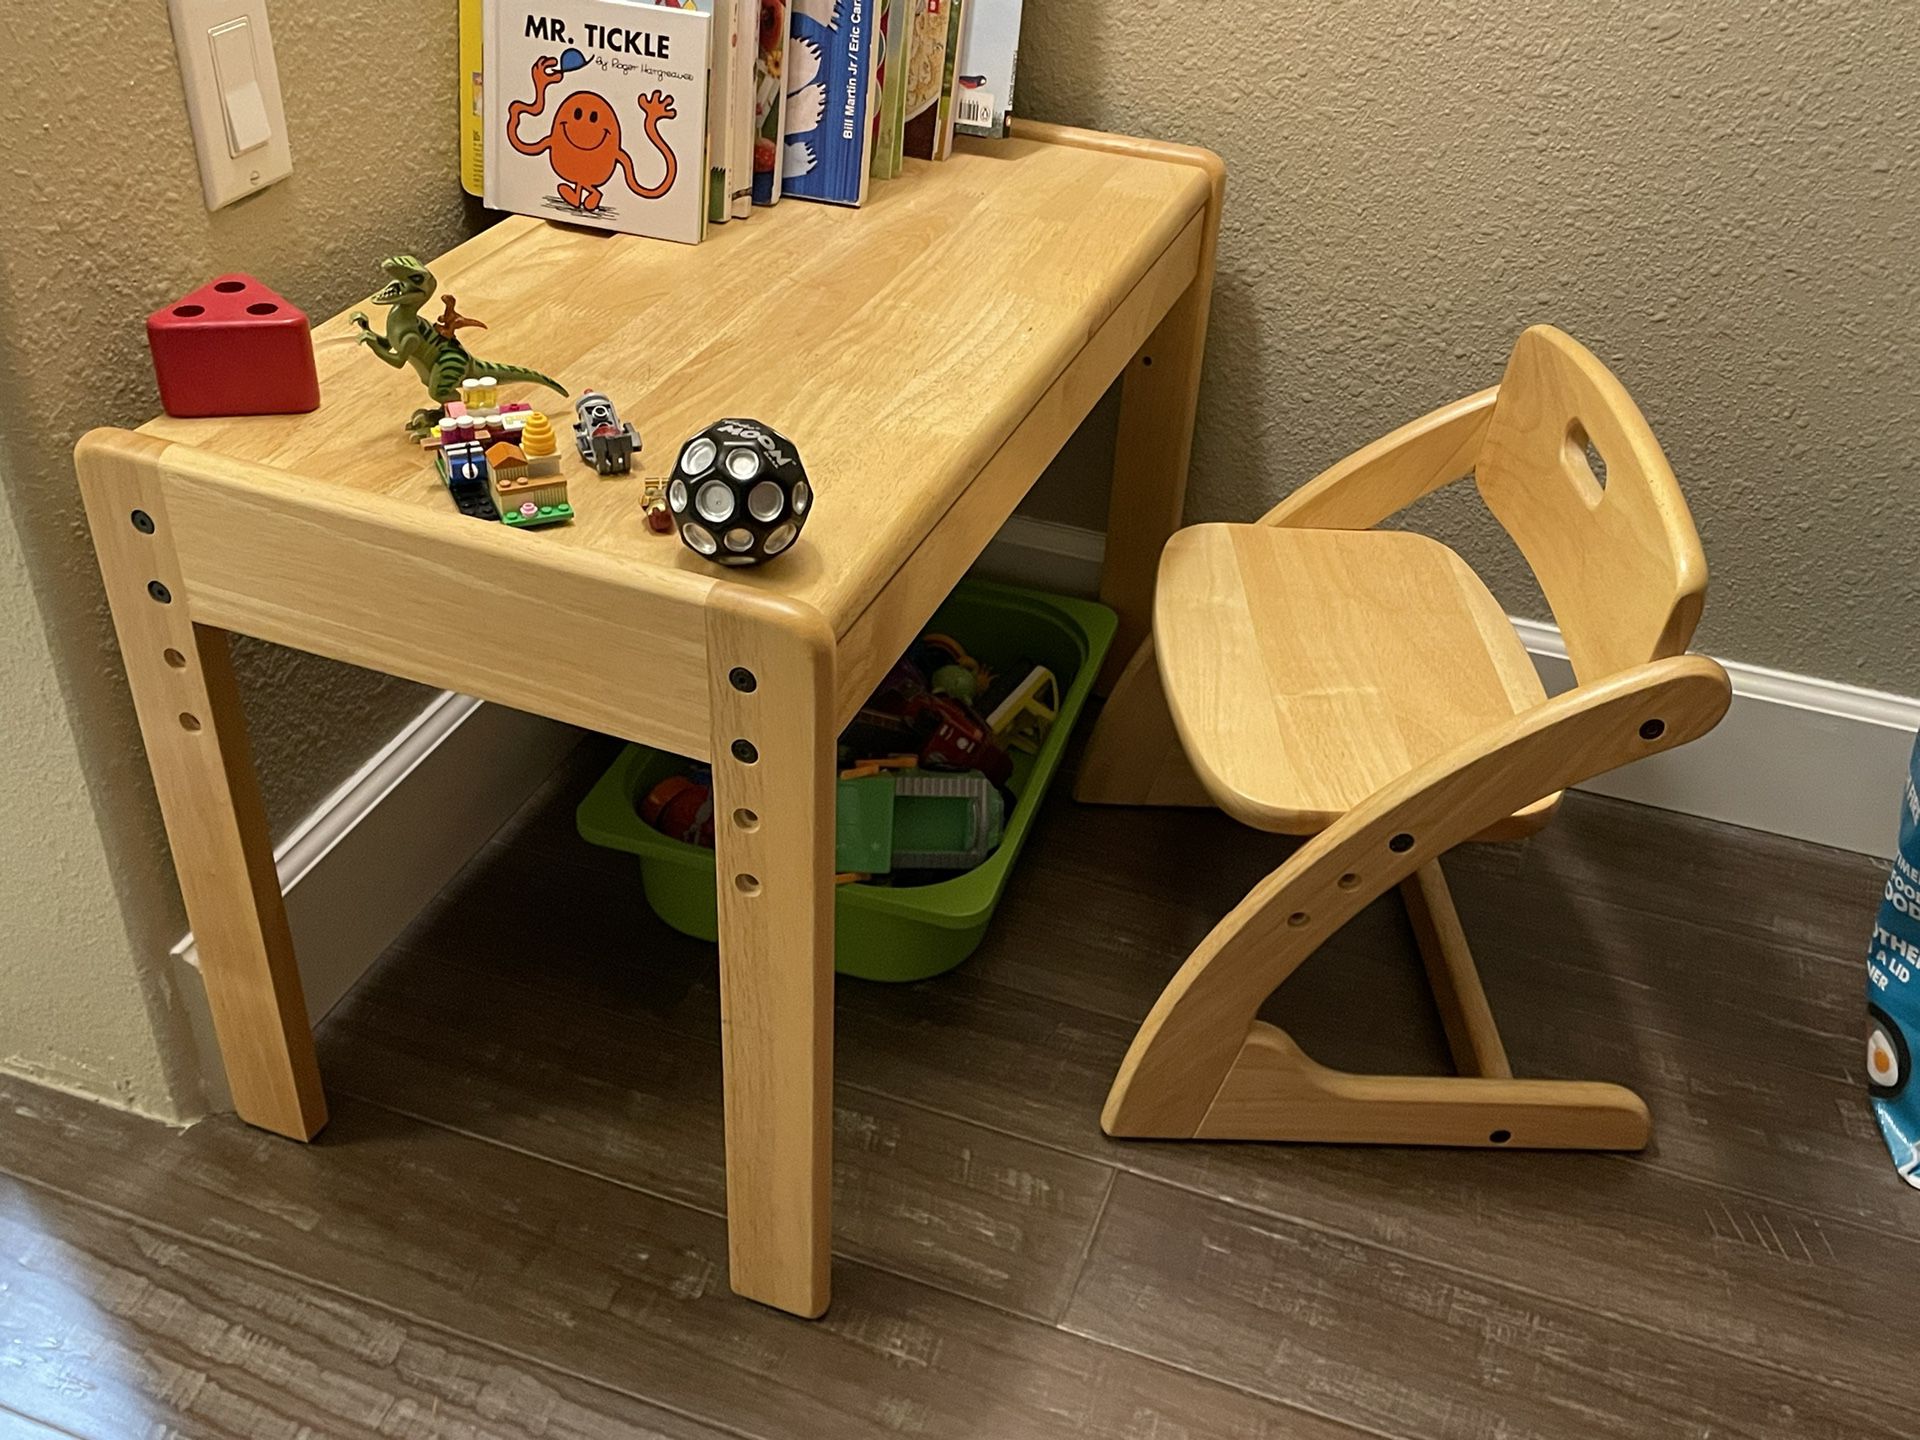 Kid’s (Toddler’s) Desk and Chair